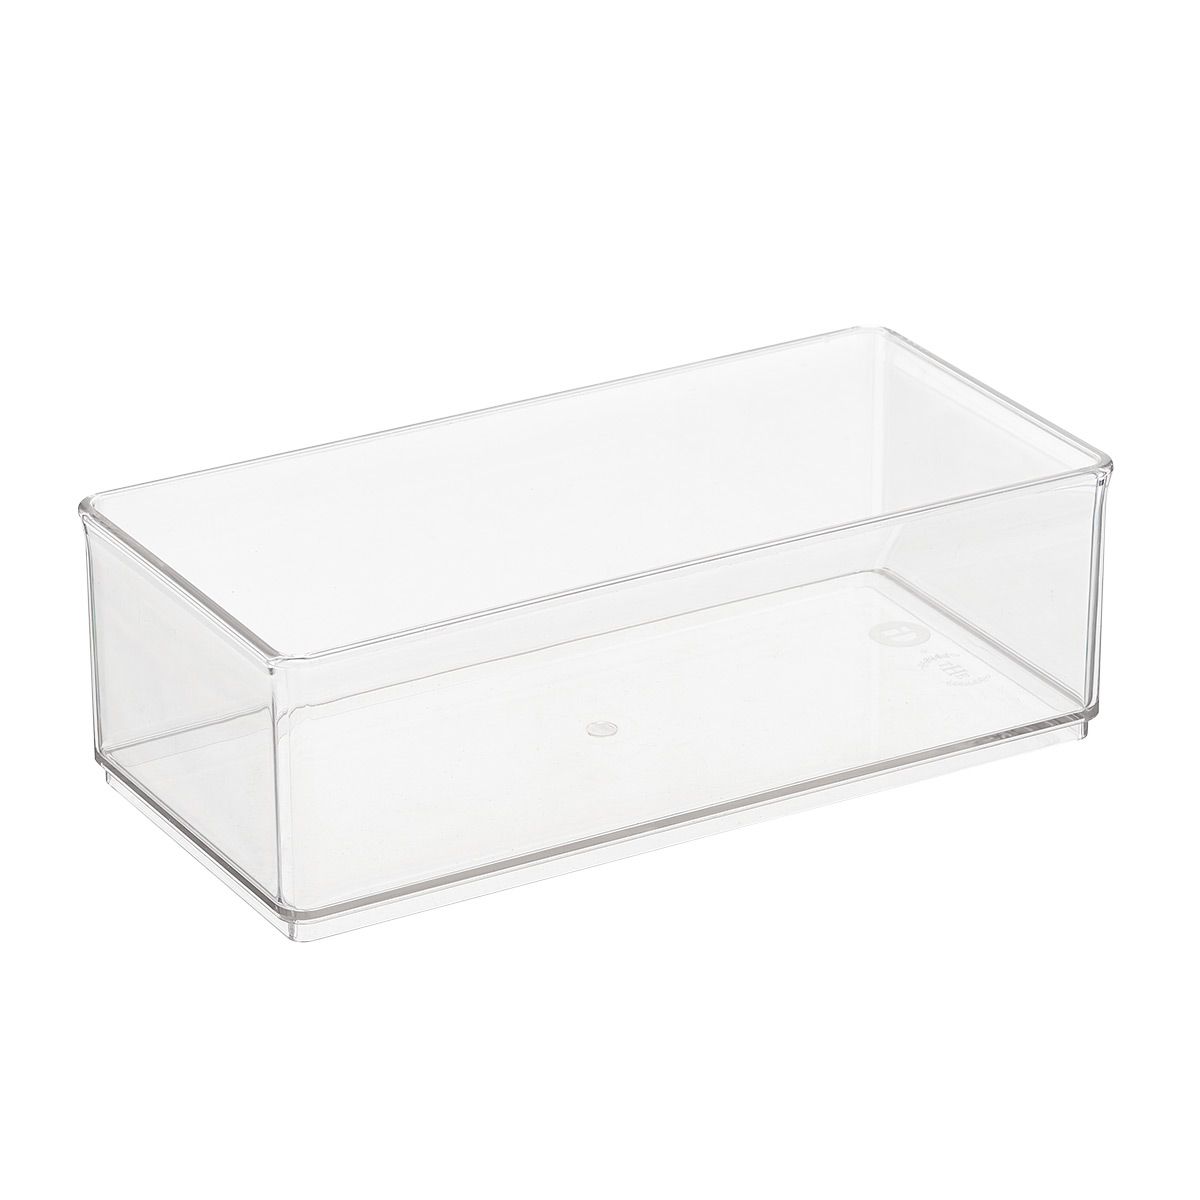 T.H.E. Large Bin Organizer | The Container Store